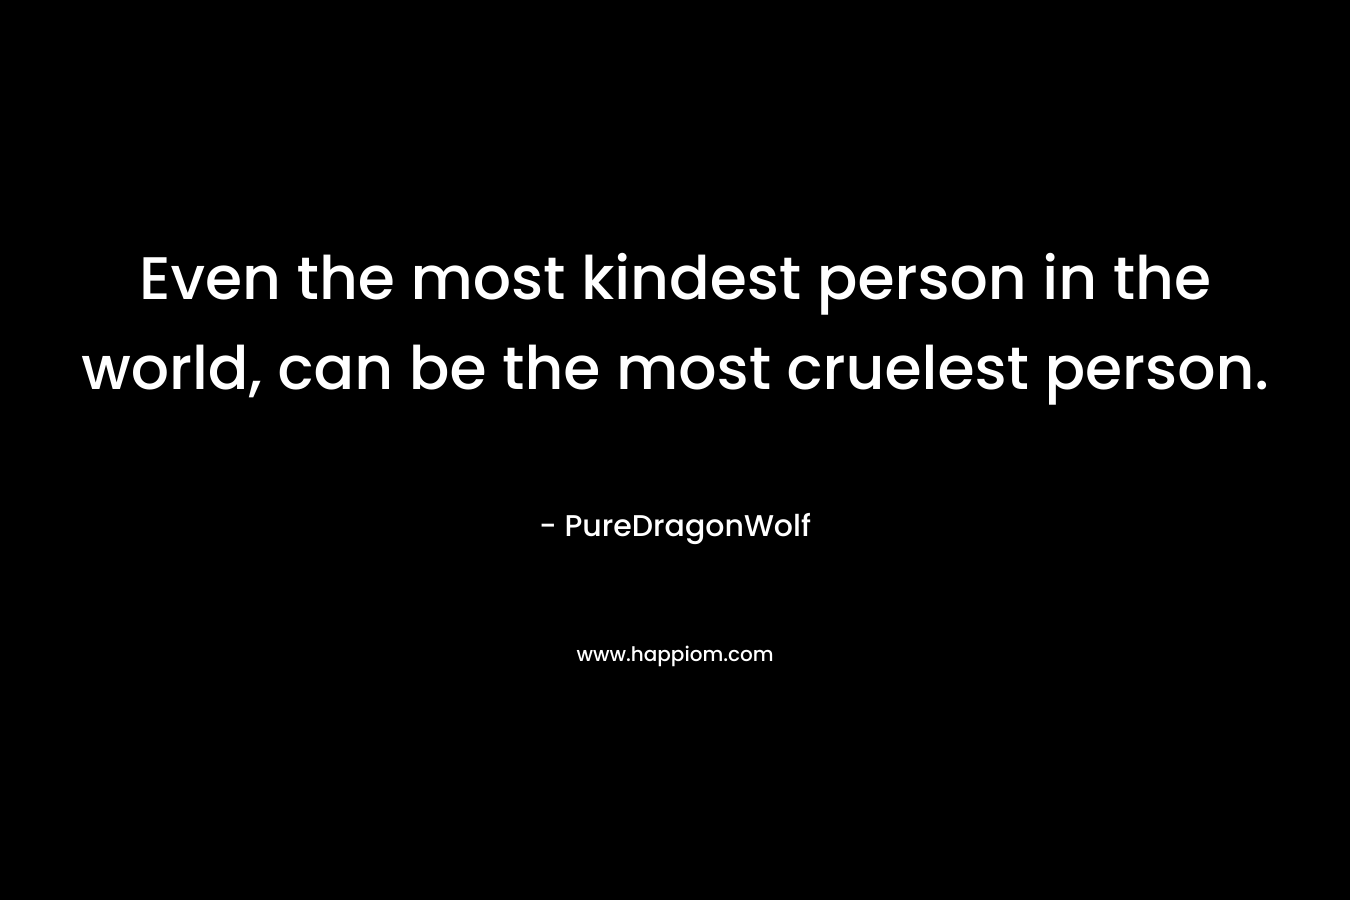 Even the most kindest person in the world, can be the most cruelest person.